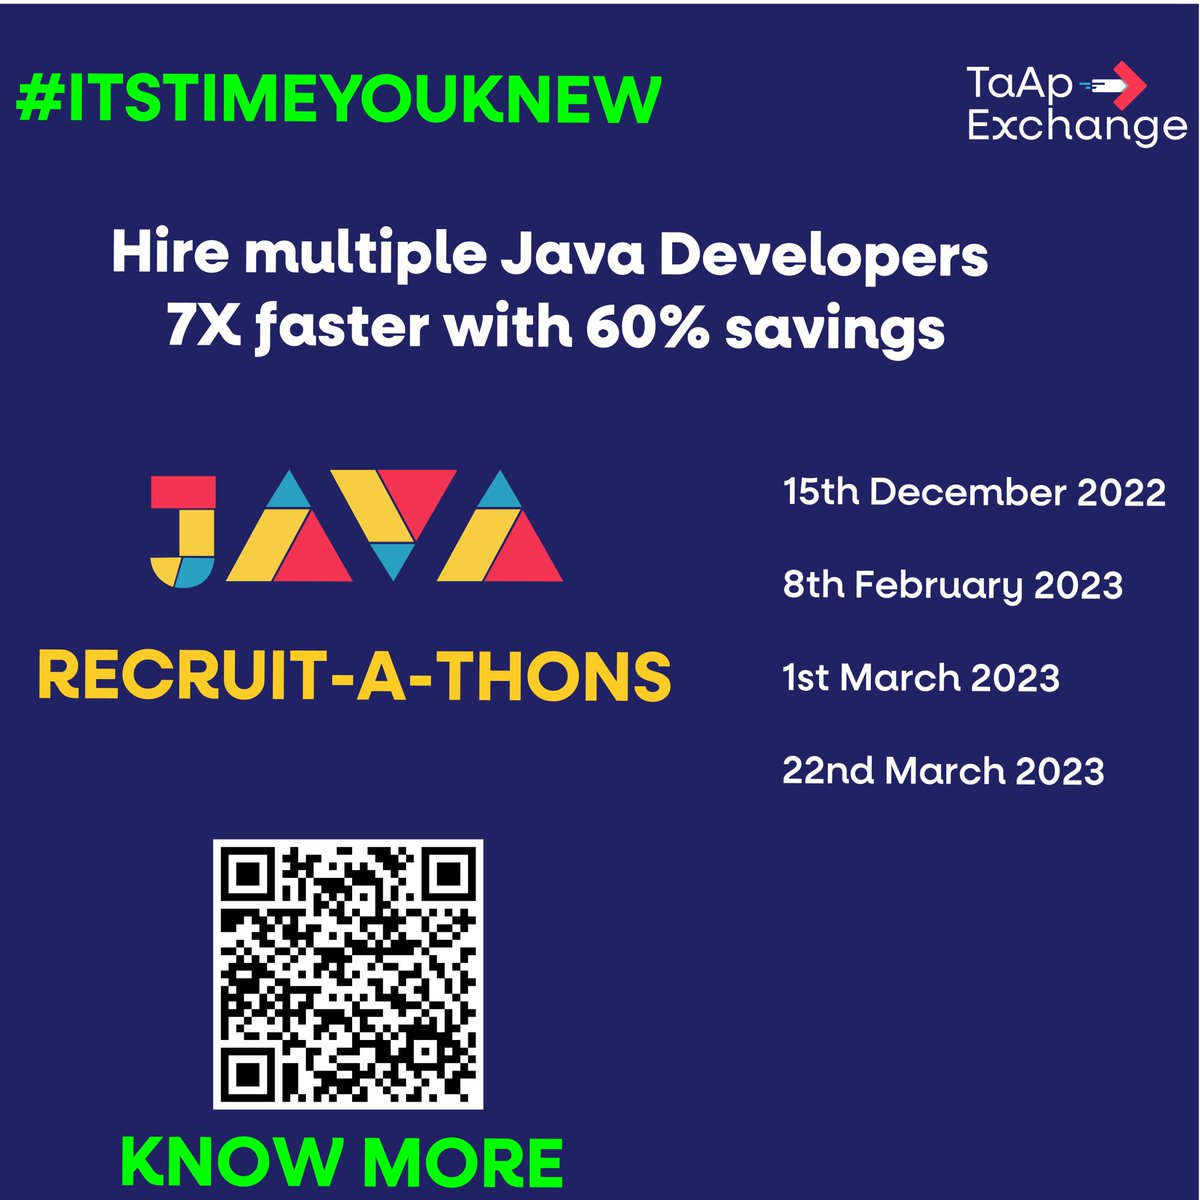 top #techtalent. Scan the QR code to know more about hiring qualified and skilled java developers in shortest time possible. #recruitmentprocessoutsourcing #usitrecruitment #usitrecruiter #usitrecruiters #techhiring #techevents #javahiring #techrecruitment #recruitmentevent 2/2